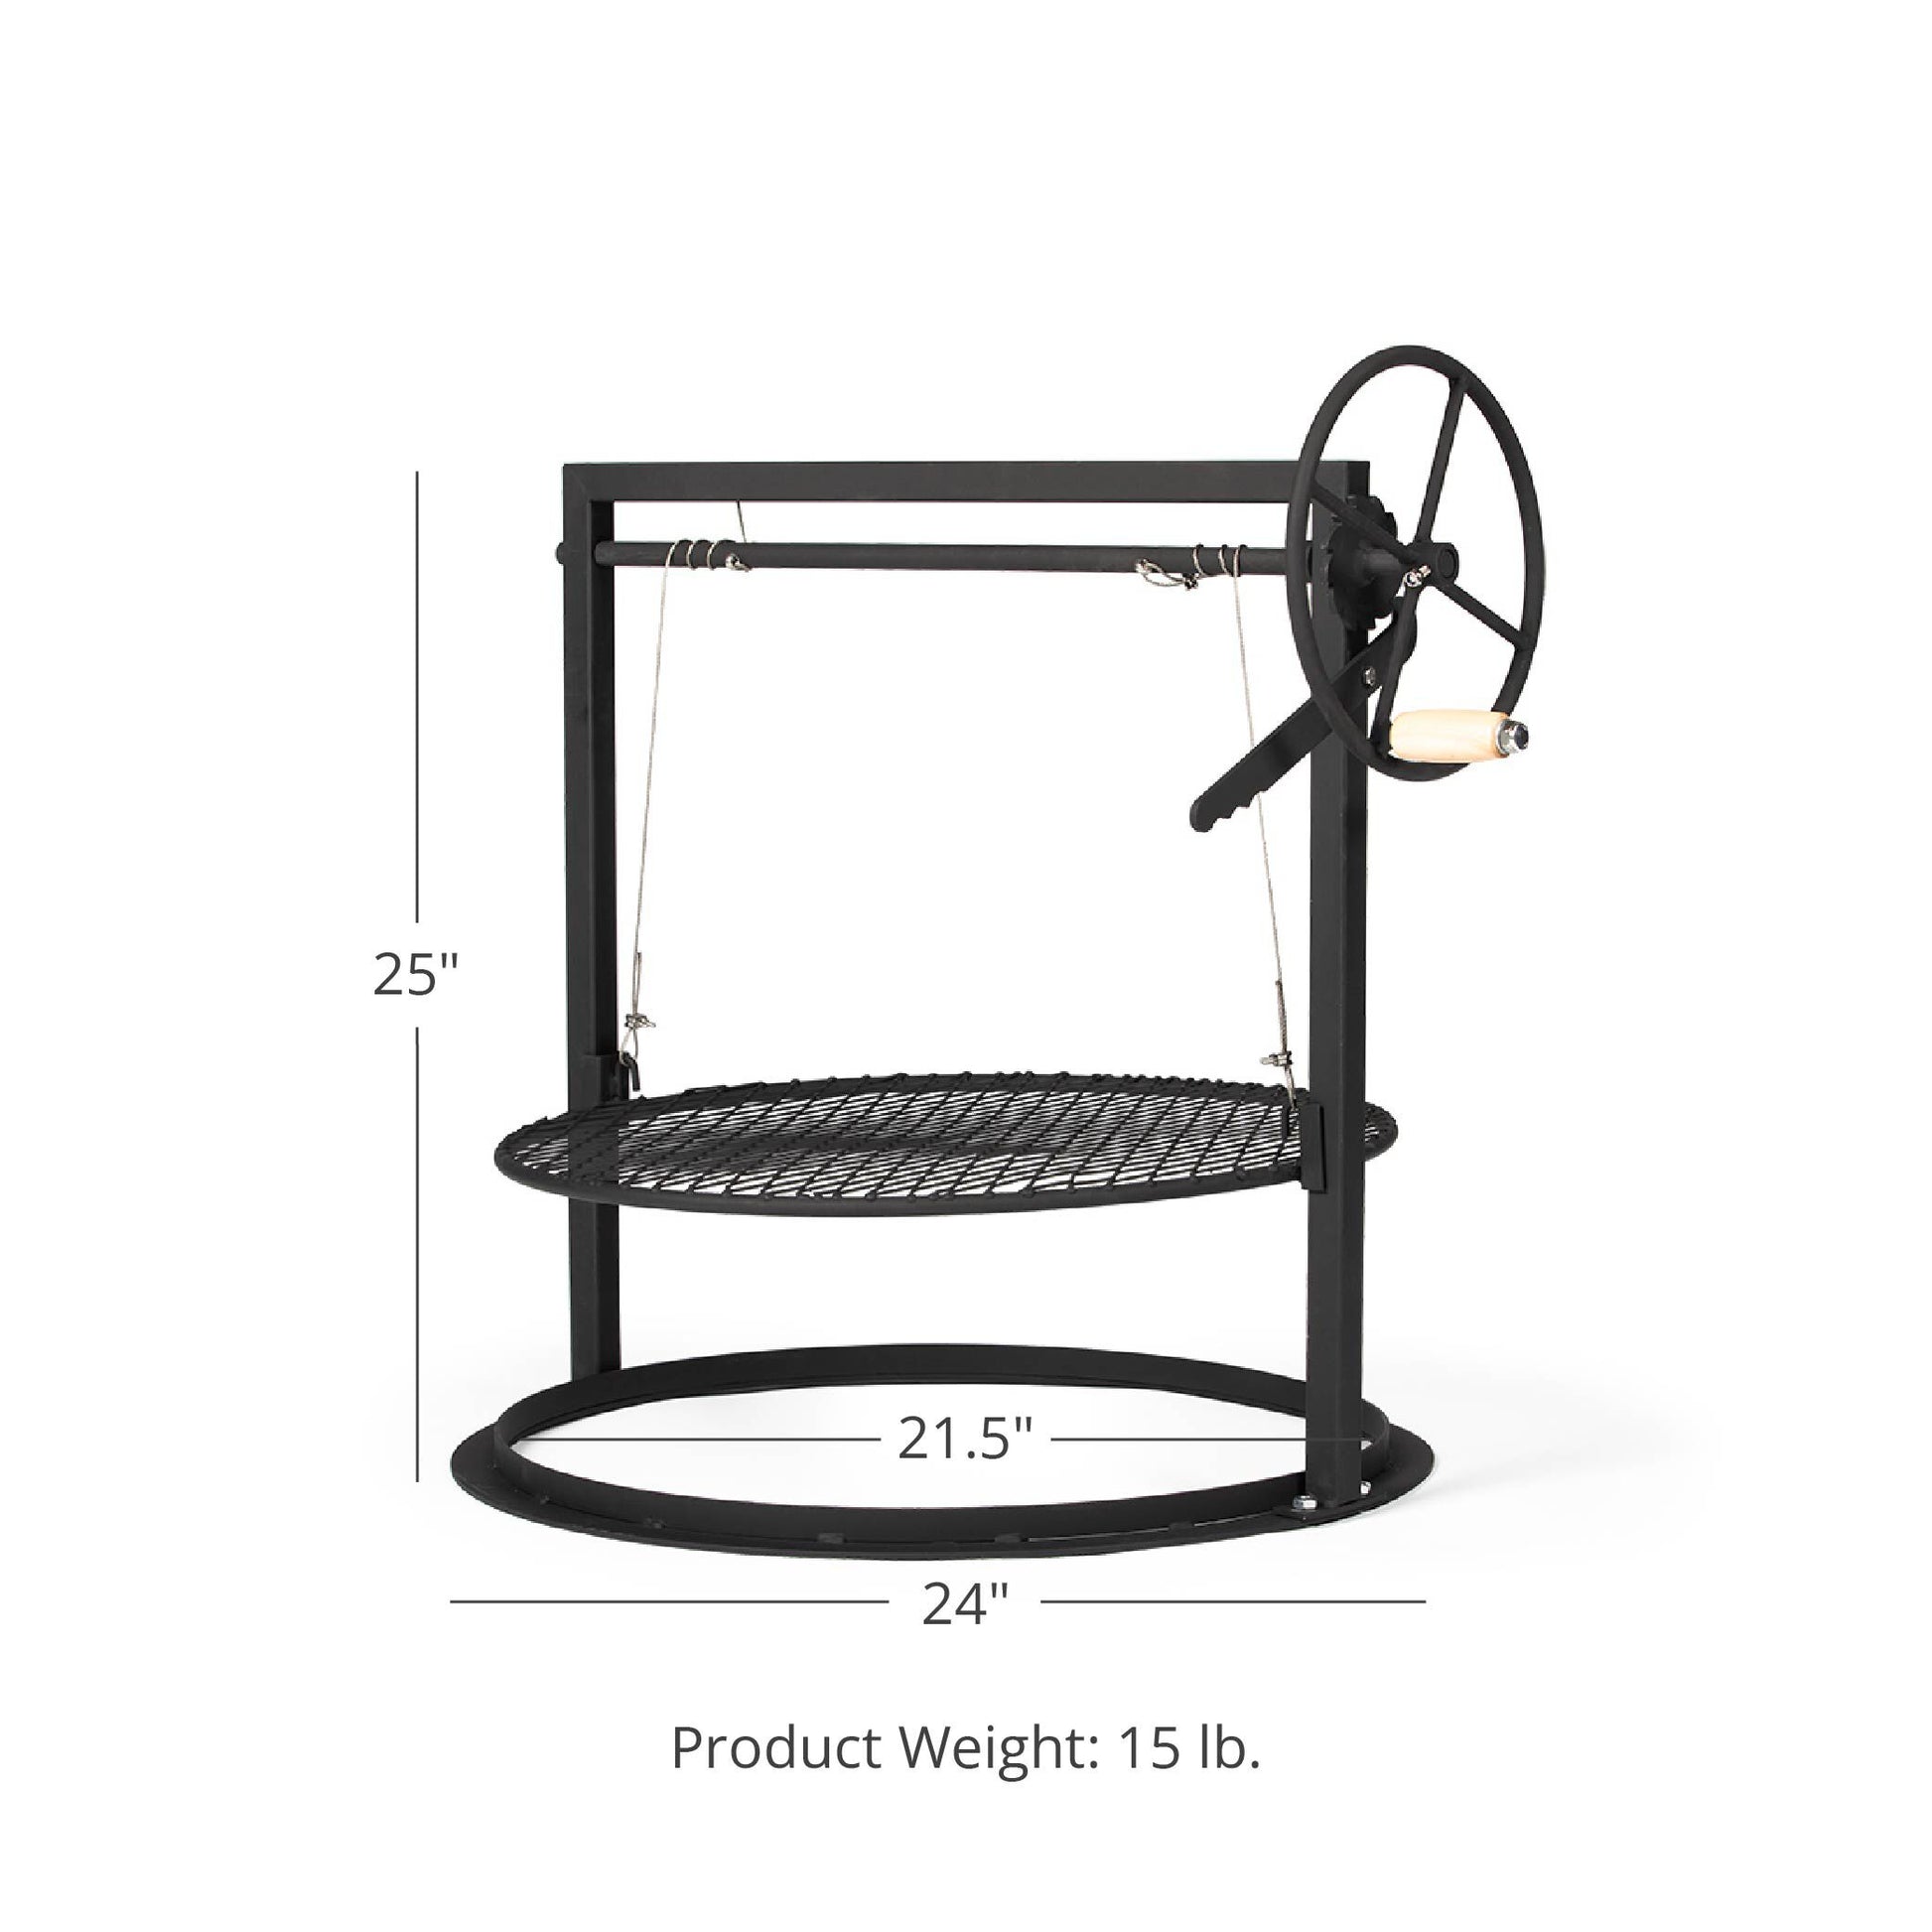 Adjustable Kettle-Style Grill Attachment